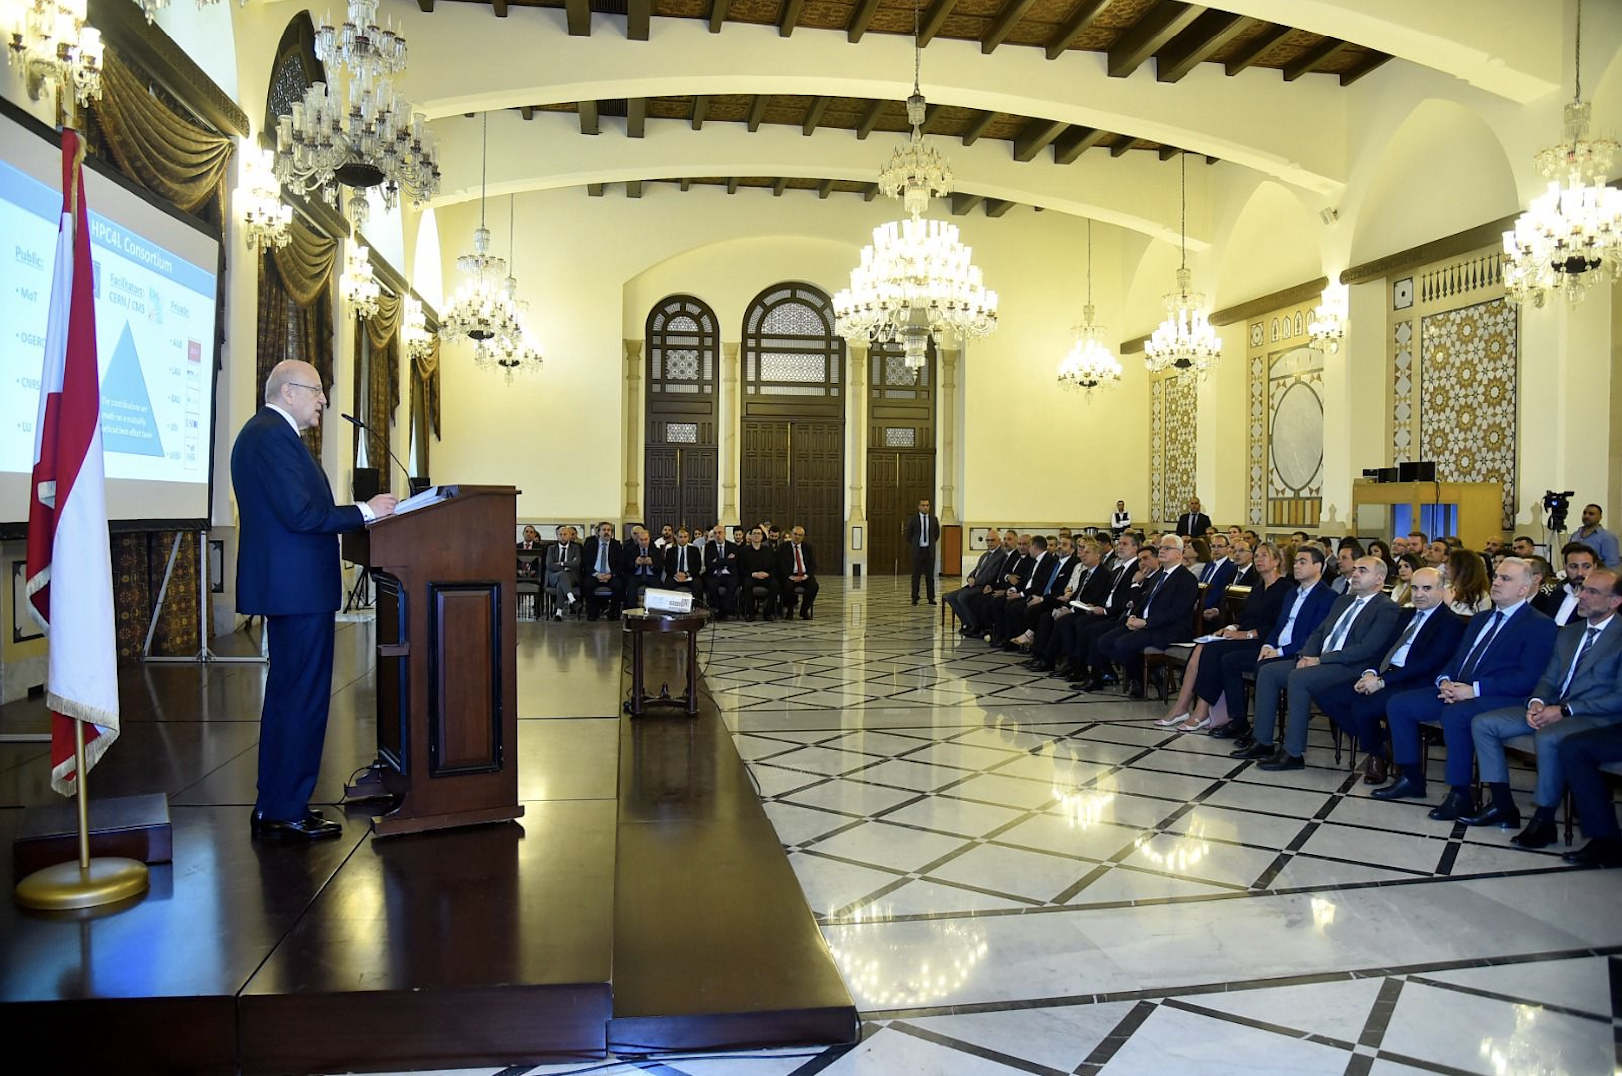 H.E. Mr. Najib Mikati, Prime Minister of Lebanon, saluted the efforts of all involved in the HPC4L project during a ceremony in Beirut’s Grand Sérail 